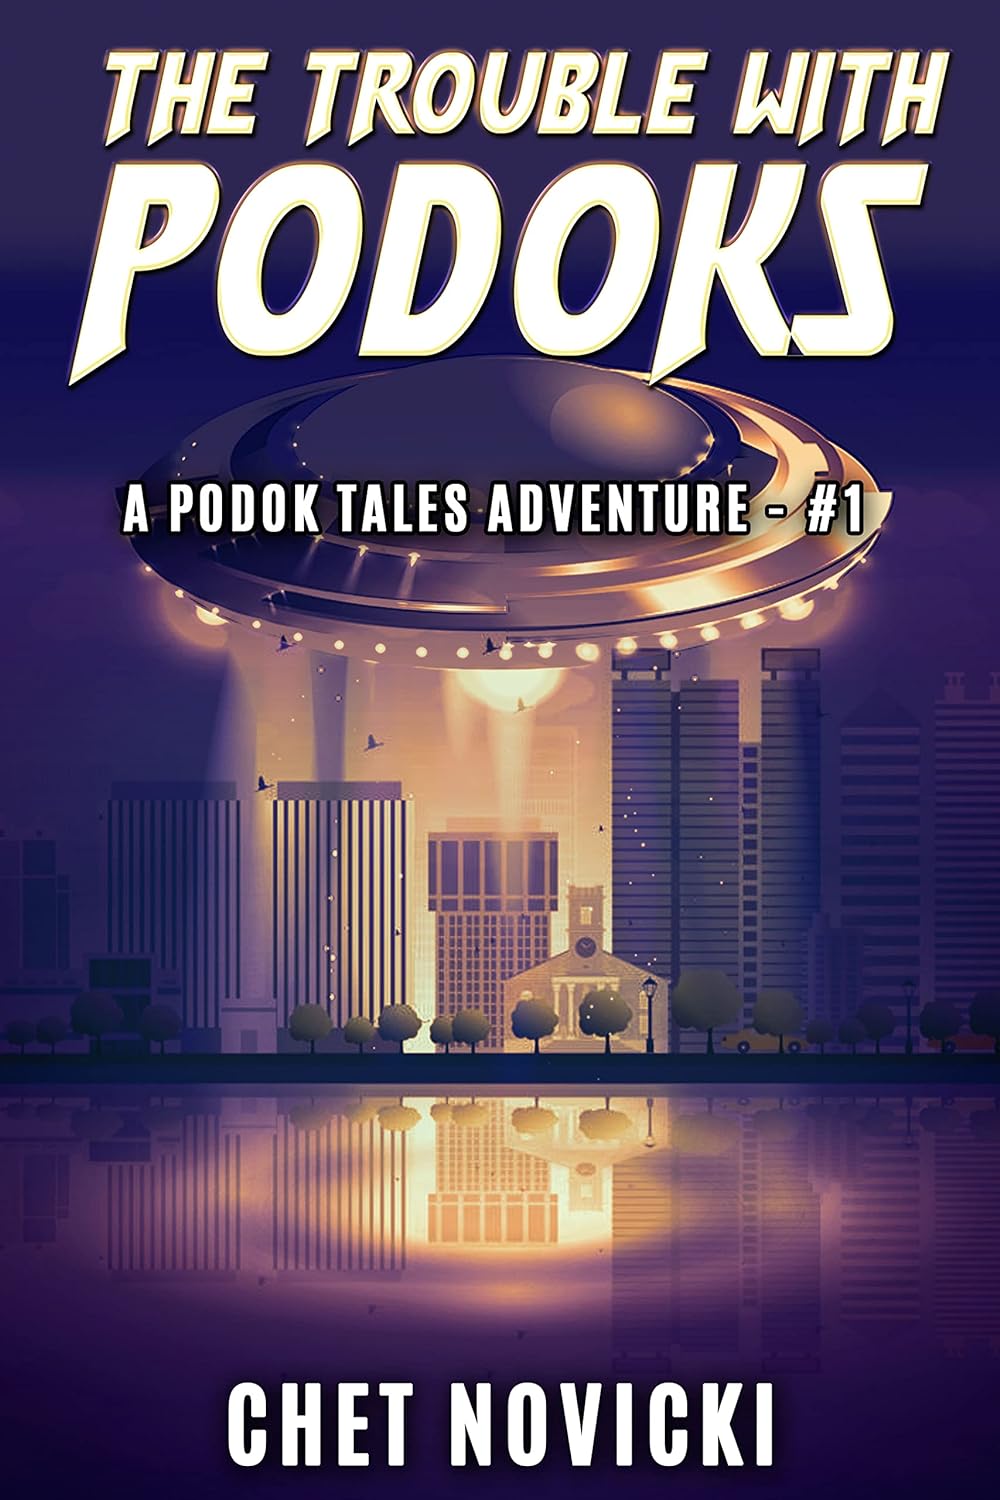 The Trouble with Podoks Fast-paced, humorous, first contact science fiction adventure